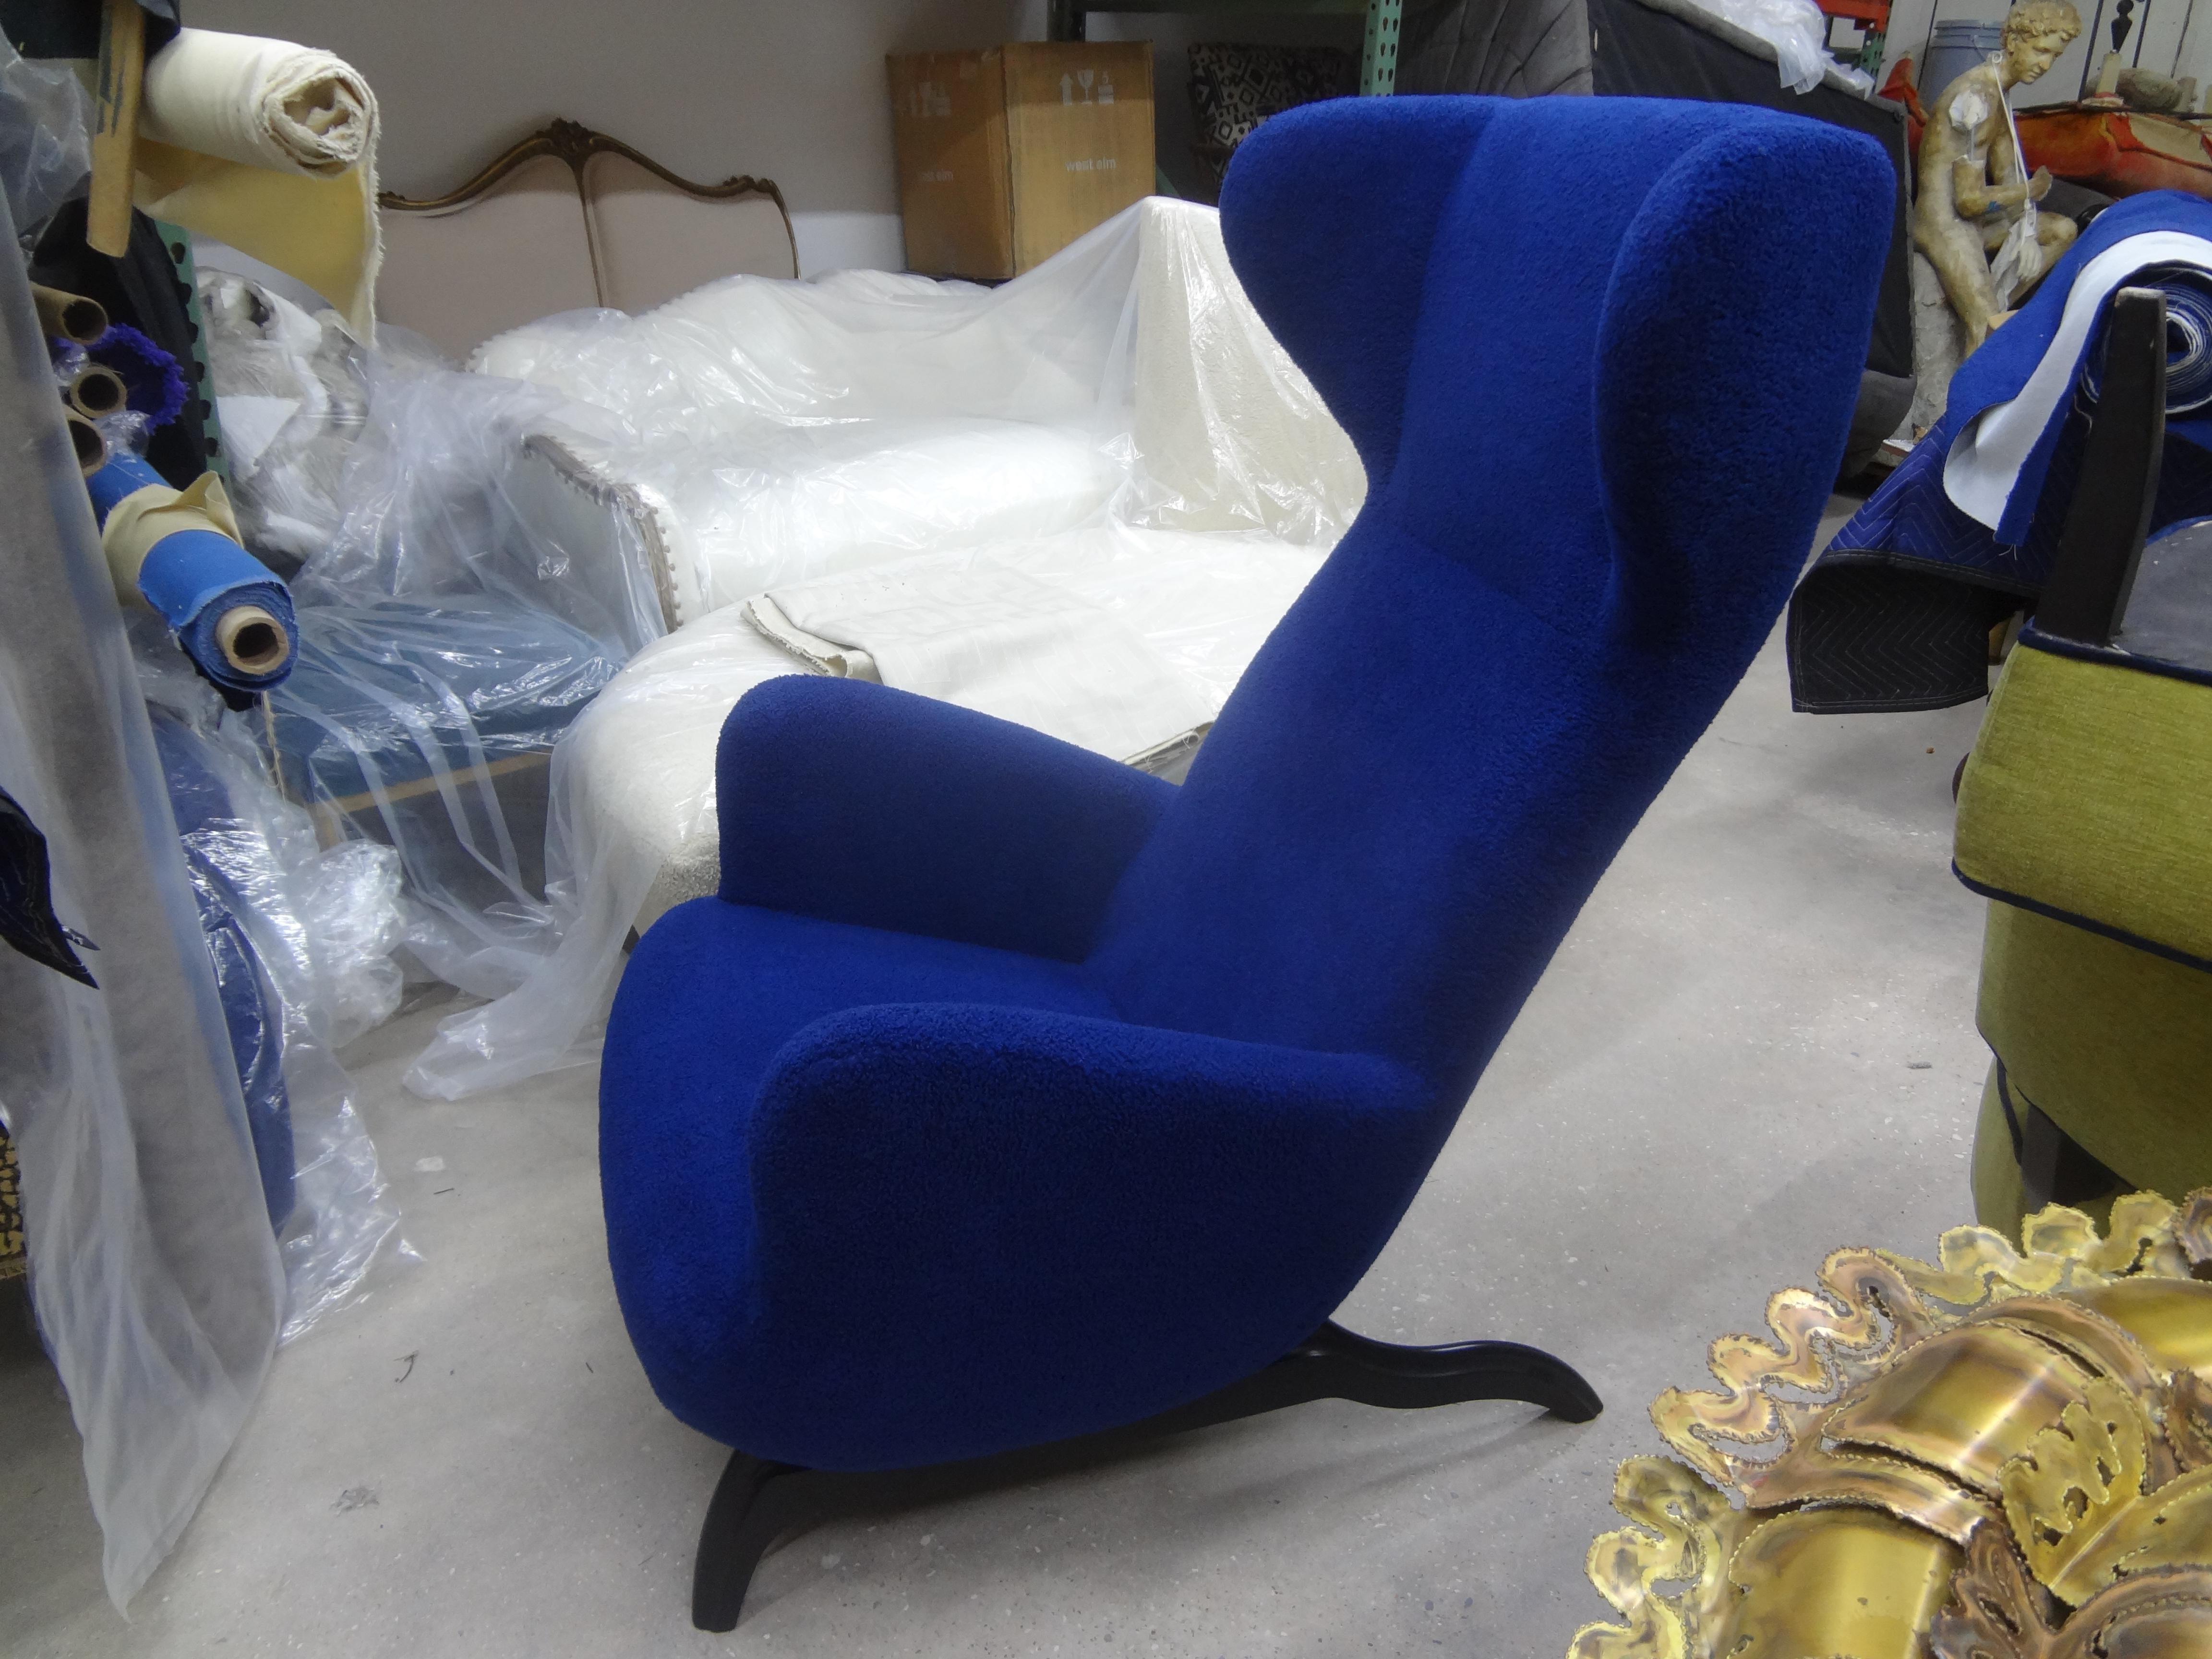 Italian Ardea lounge chair after a design by Carlo Mollino.
 
Stunning curvaceous Italian lounge chair with exaggerated ebonized legs professionally upholstered in plush blue bouclé. 
This chair was acquired out of an estate in Milan in 2012. It had